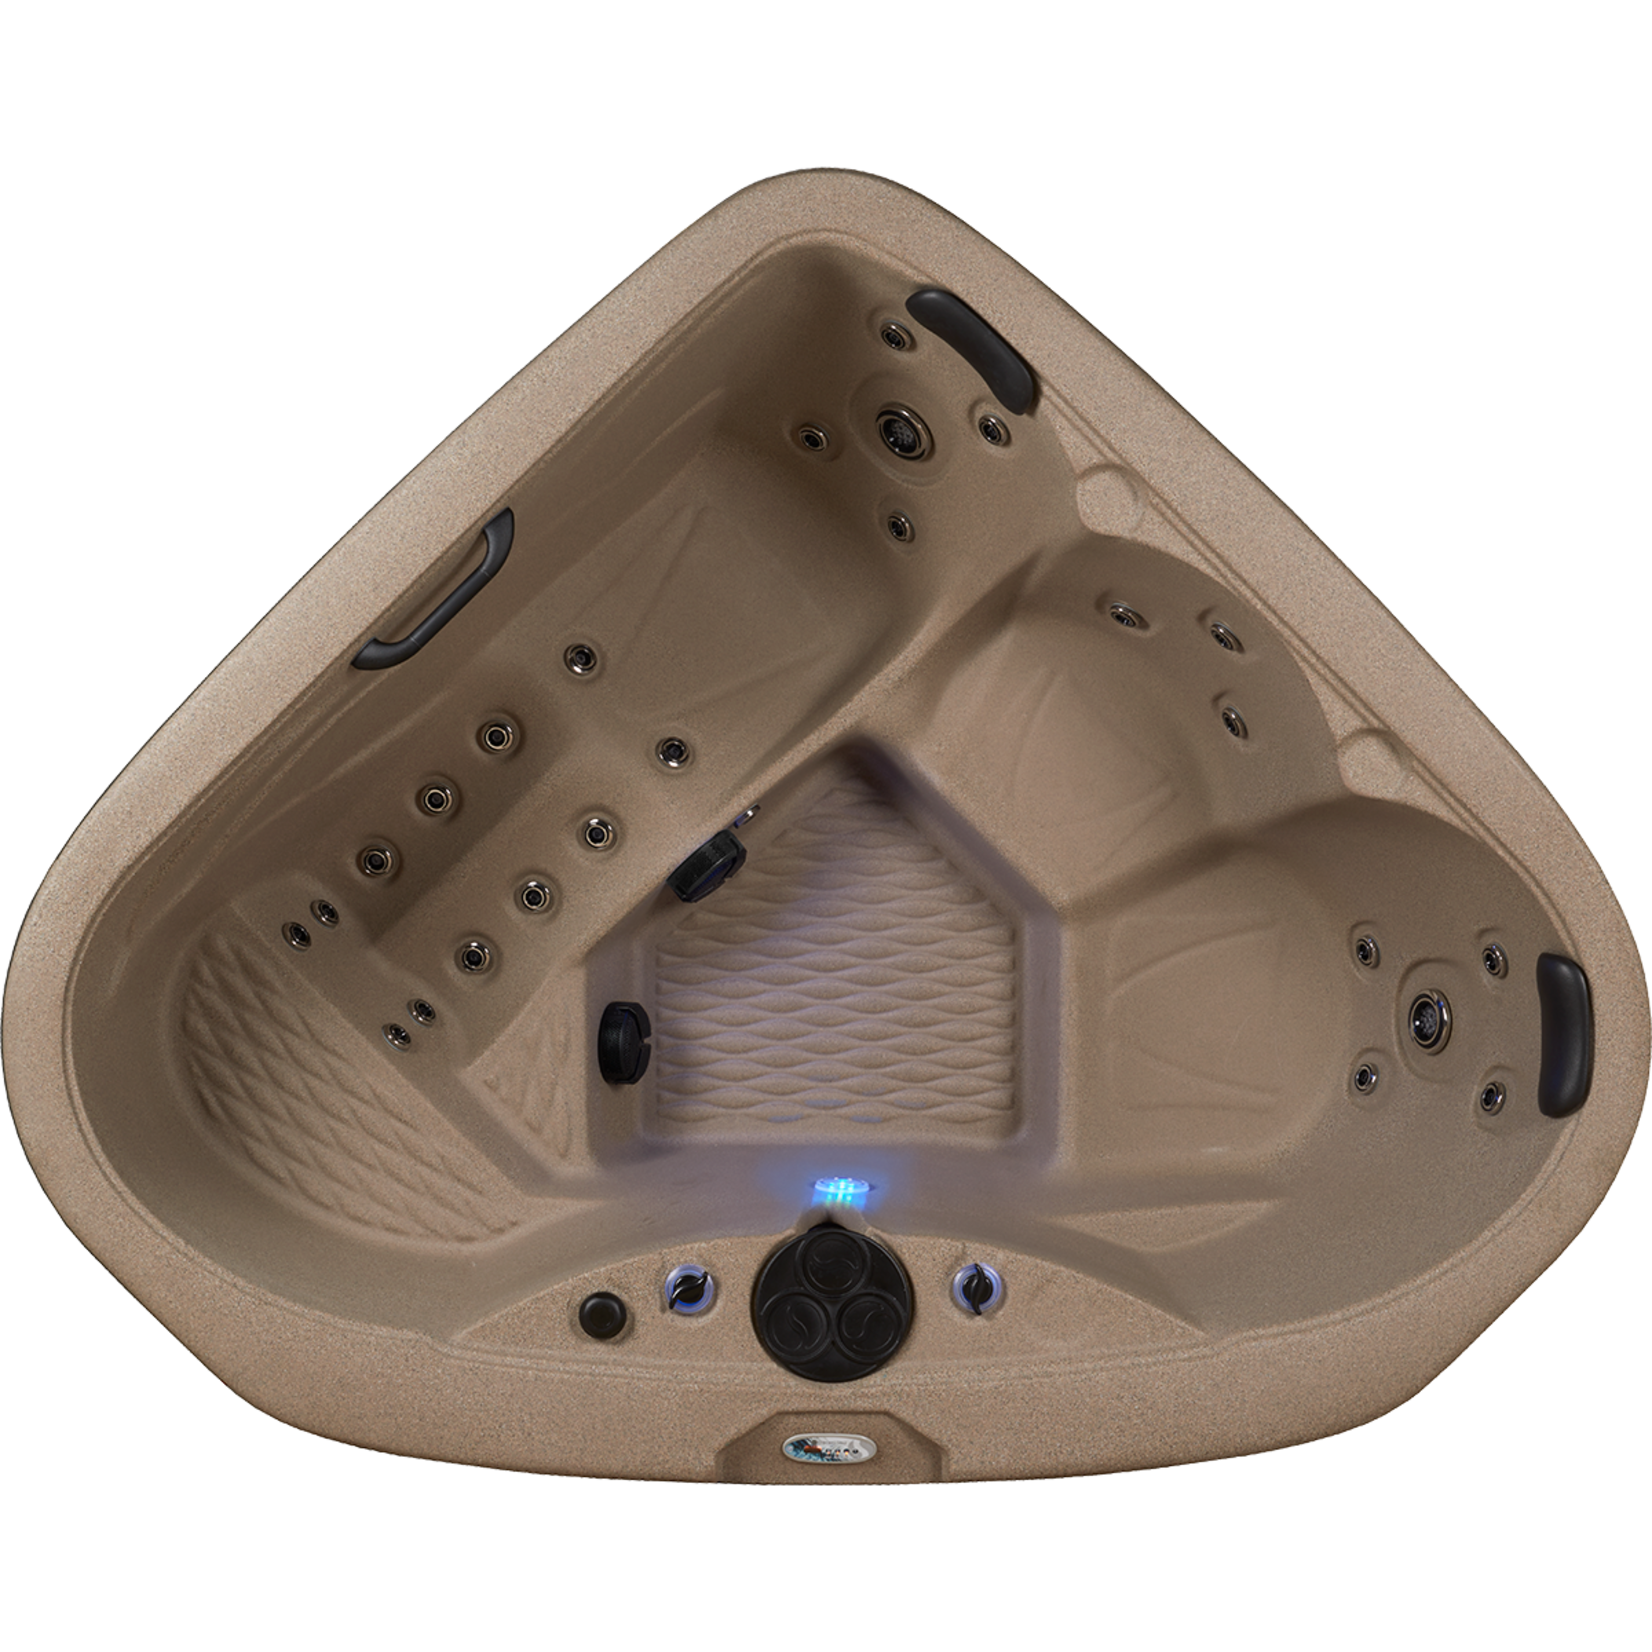 STRONG SPAS Durasport - TR-26 ( 26 Jets ) COMES WITH:  OZONATOR , UNDERWATER LED + LED CONTROL